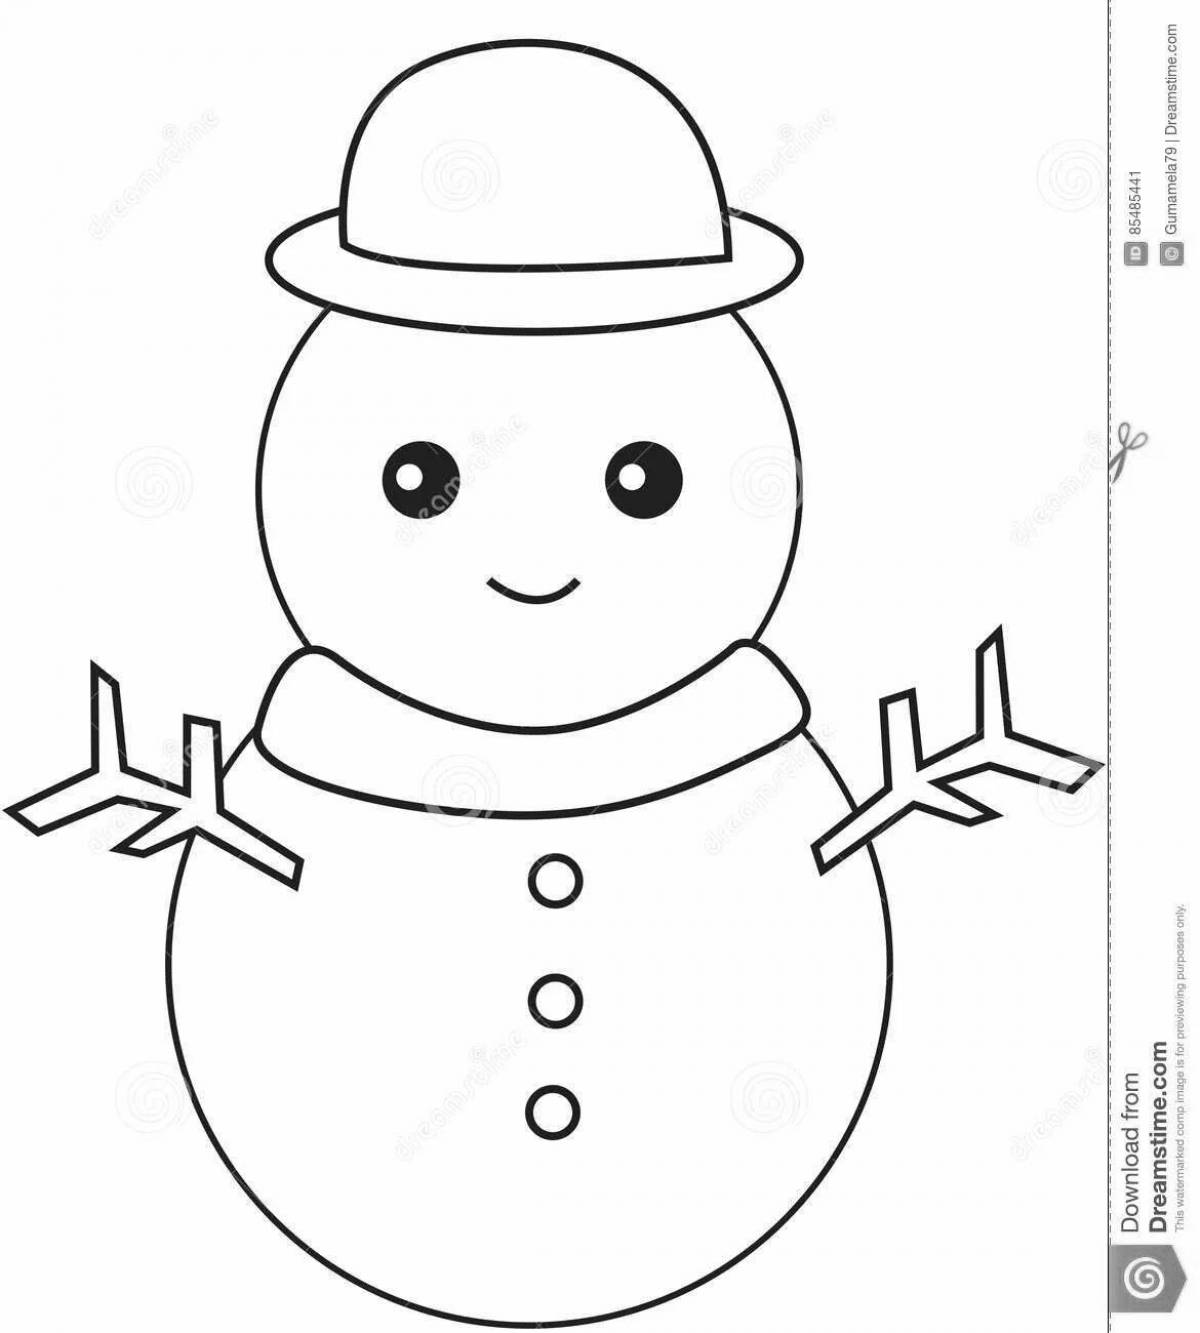 Coloring book bright snowman mask